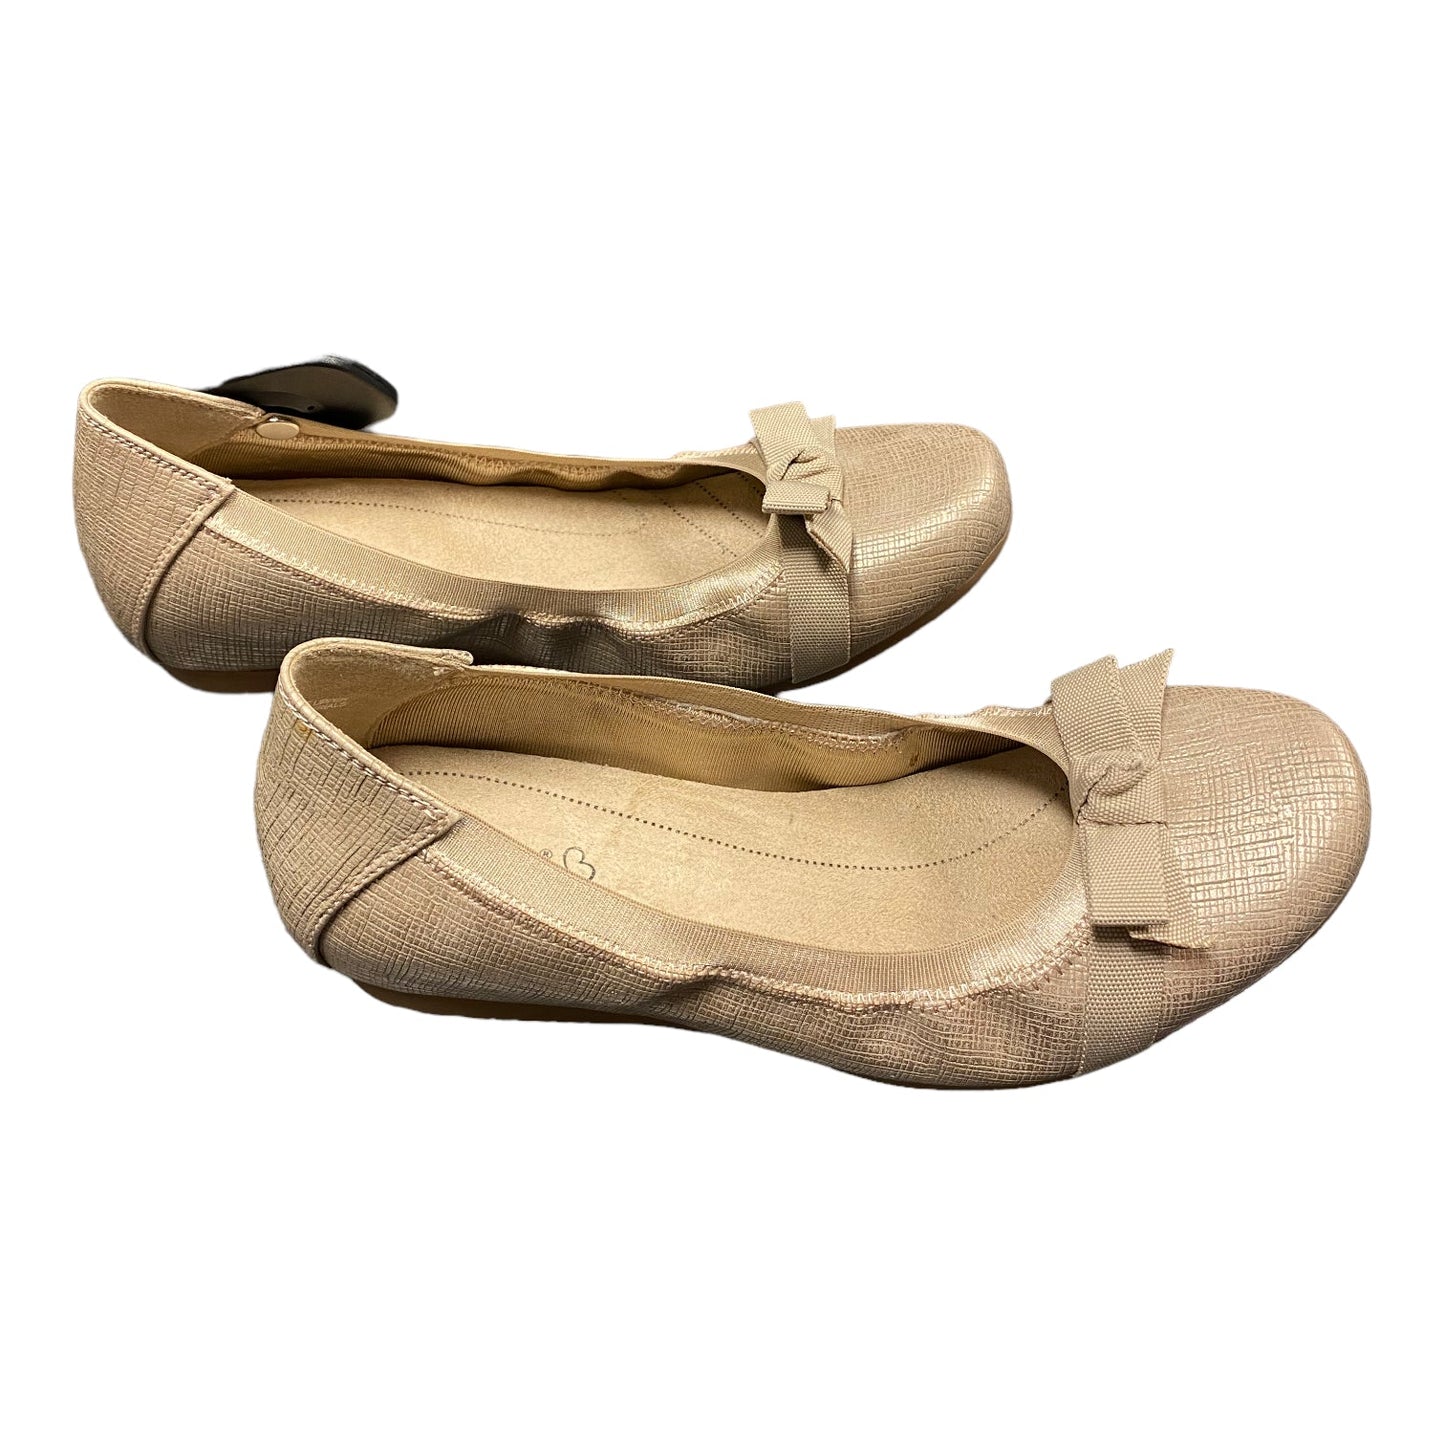 Shoes Flats By Bare Traps  Size: 7.5